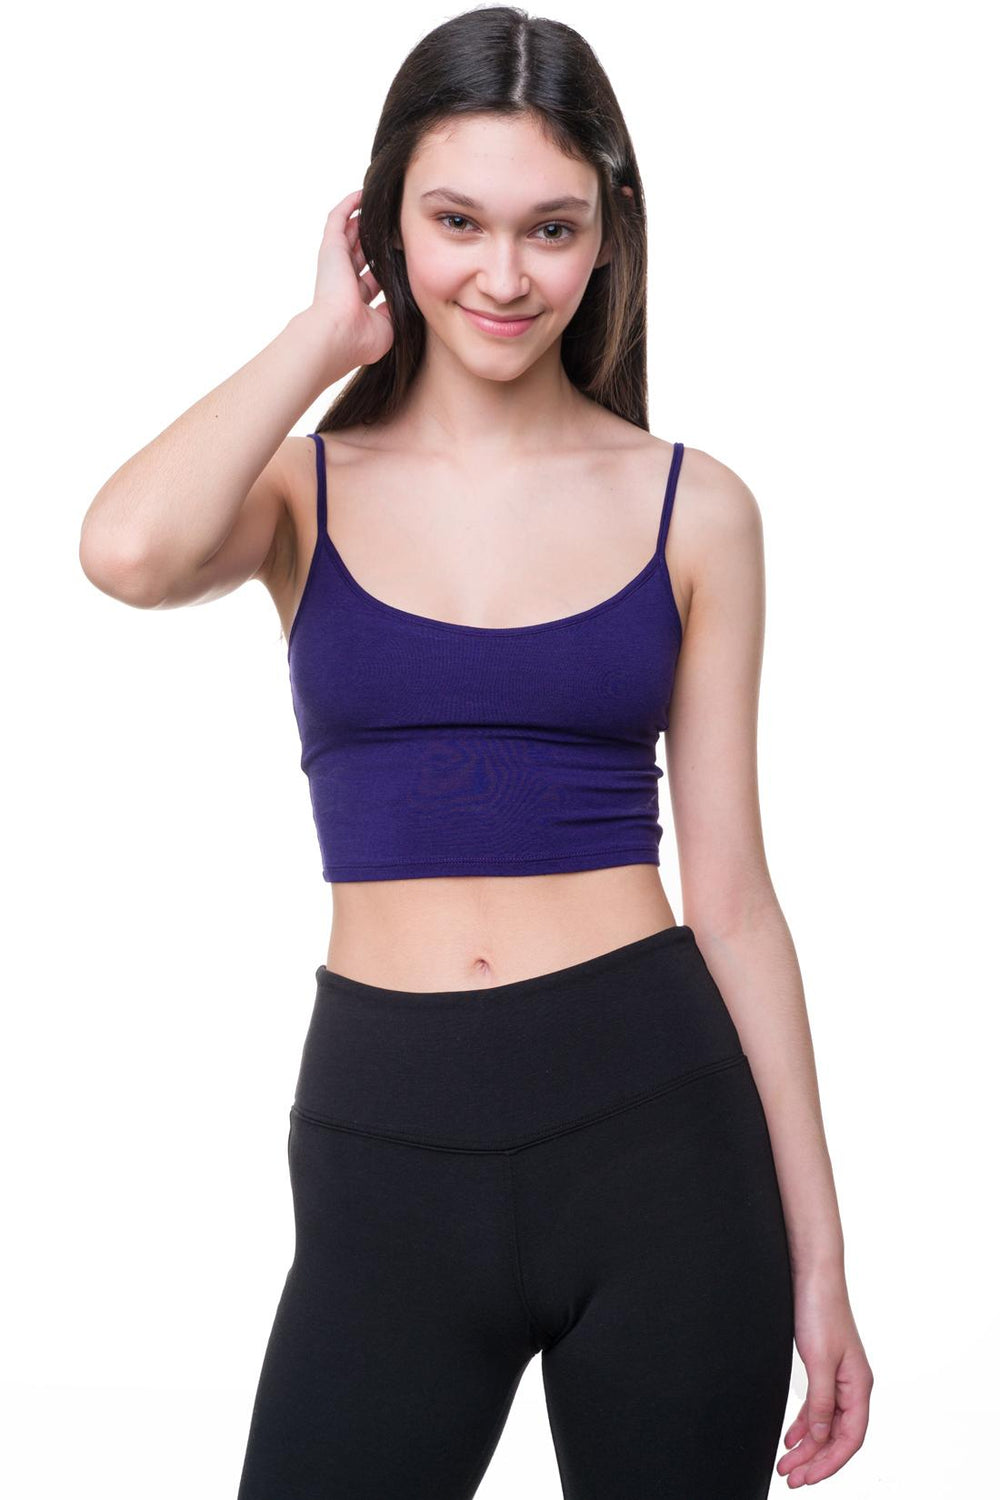 LAVOS Bamboo Cotton Everyday Sports Bra for Women Non Padded Full